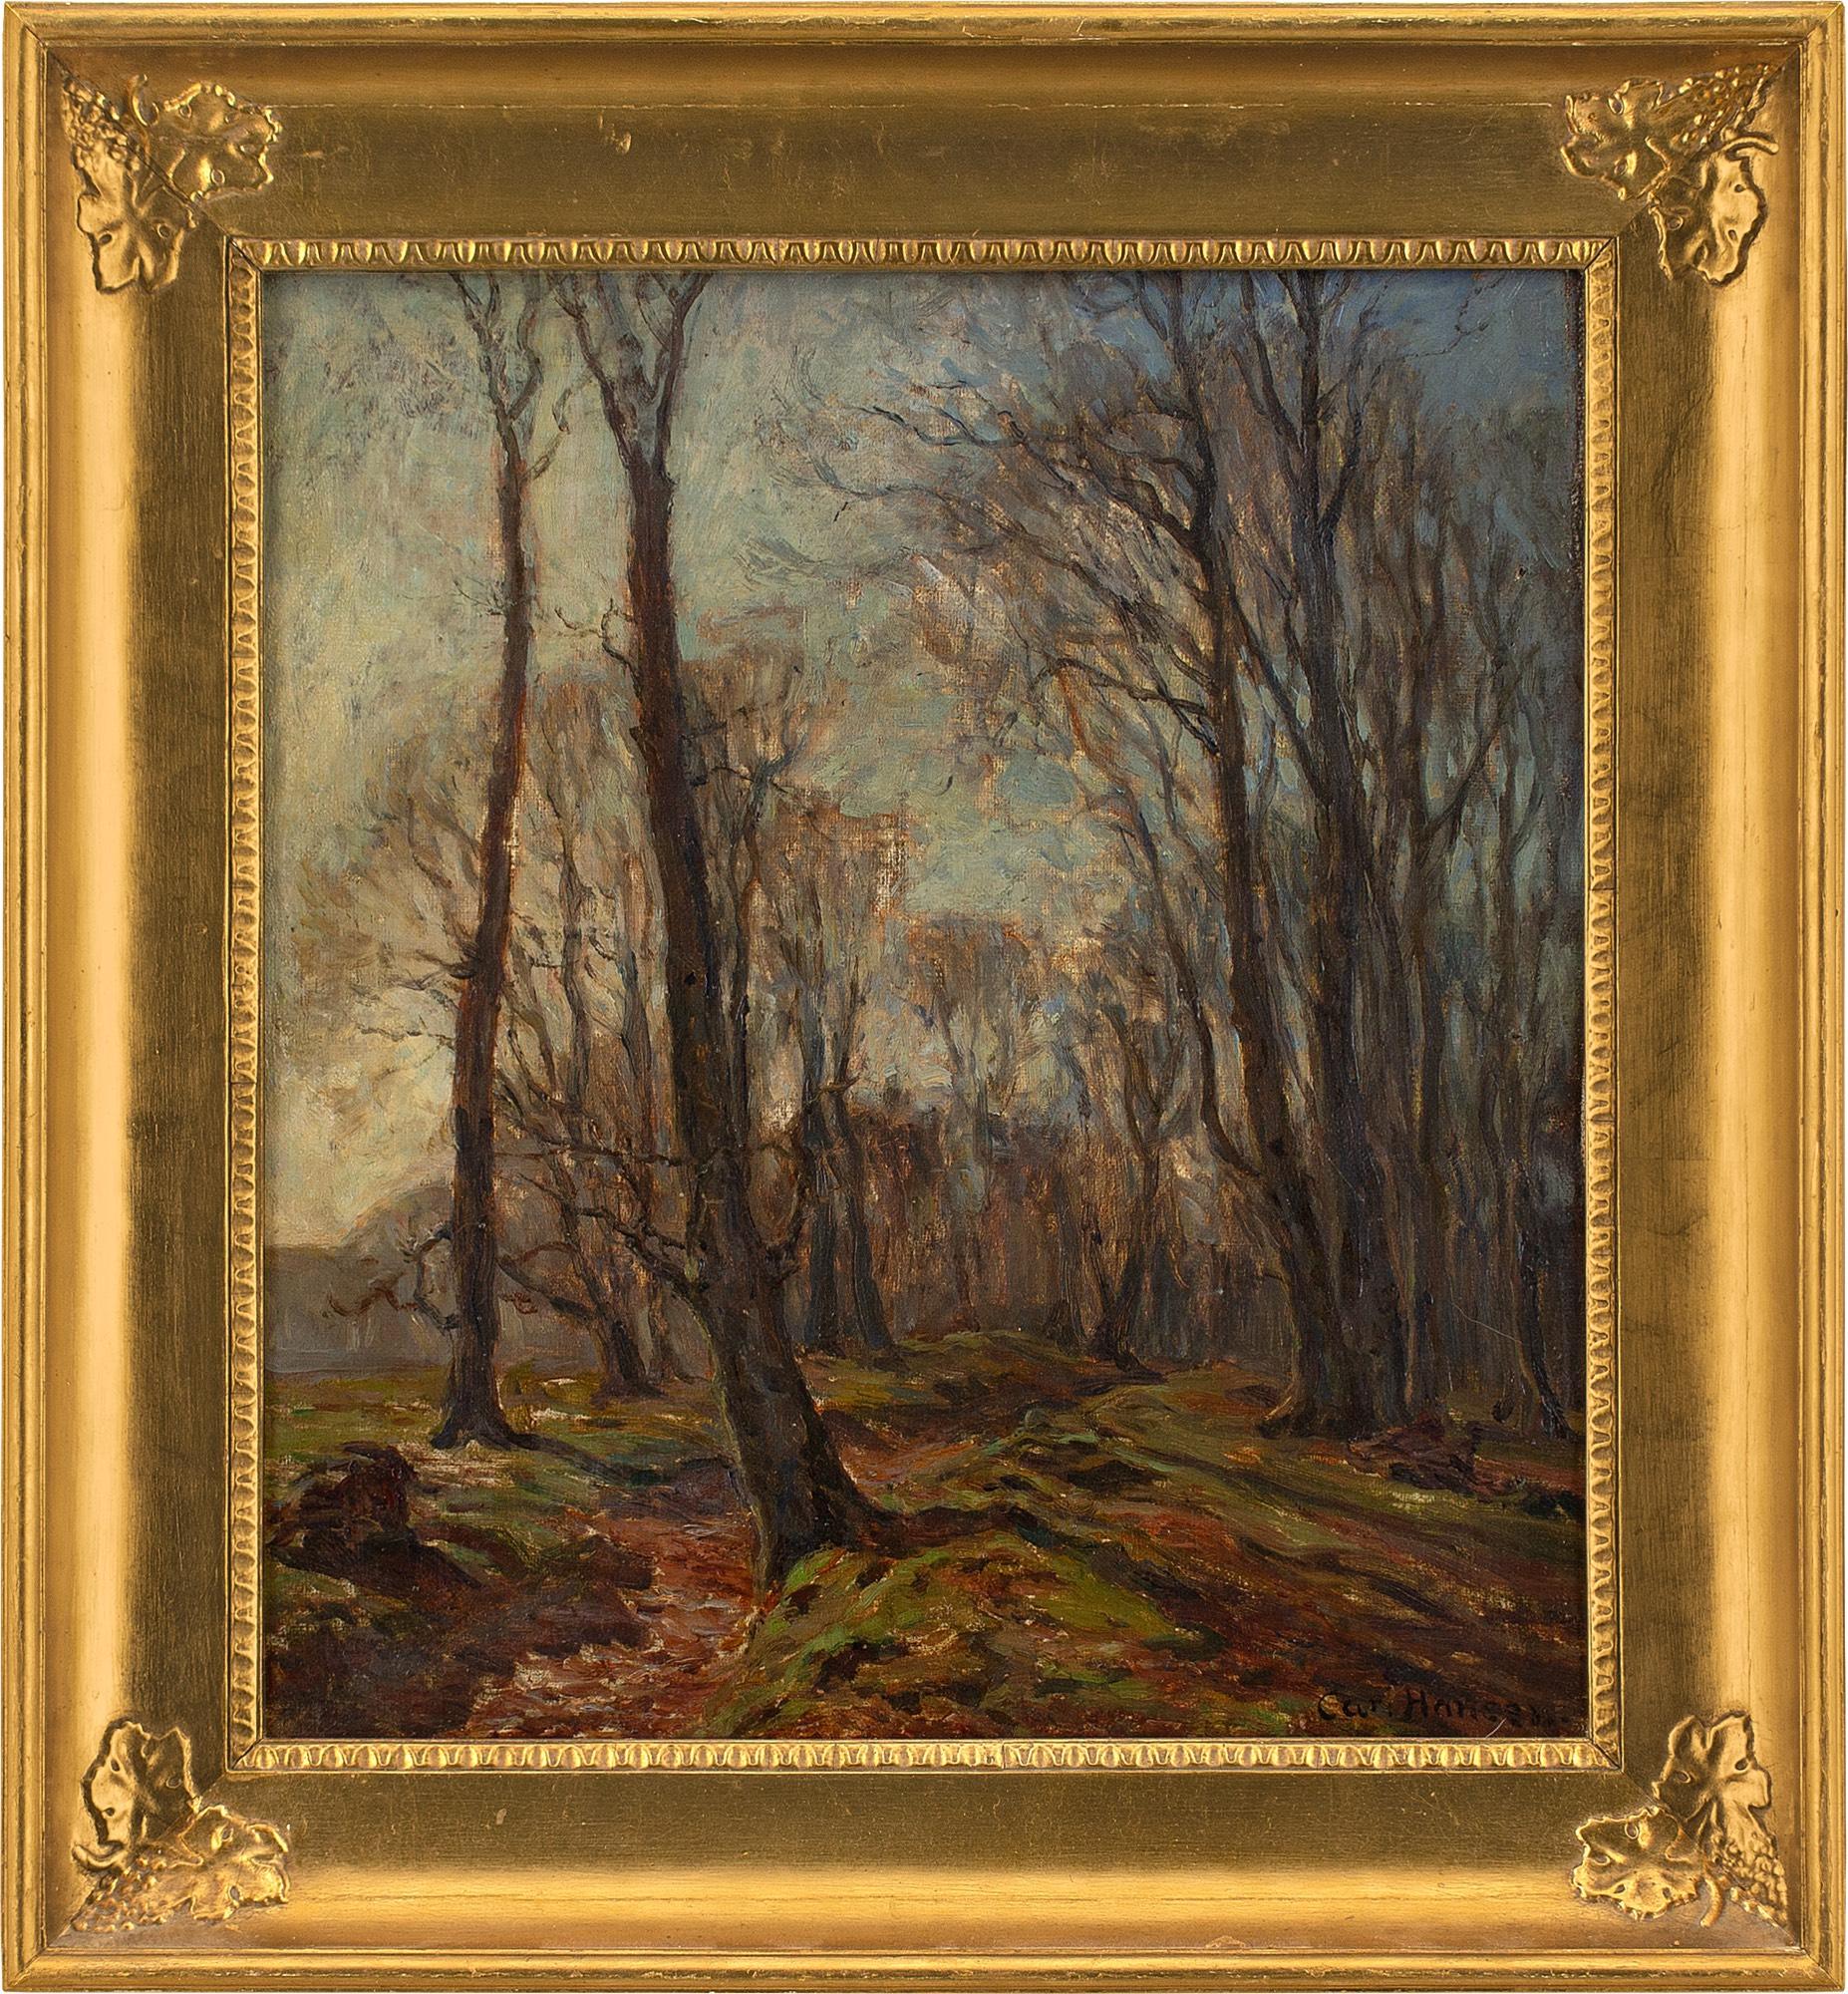 This early 20th-century oil painting by Danish artist Carl Hansen (1870-1934) depicts a wooded view at Dyrehaven (Deer Park), Copenhagen. It was exhibited at a retrospective in 1935.

Leaning towards an early sun, the bare trees of Winter cast long